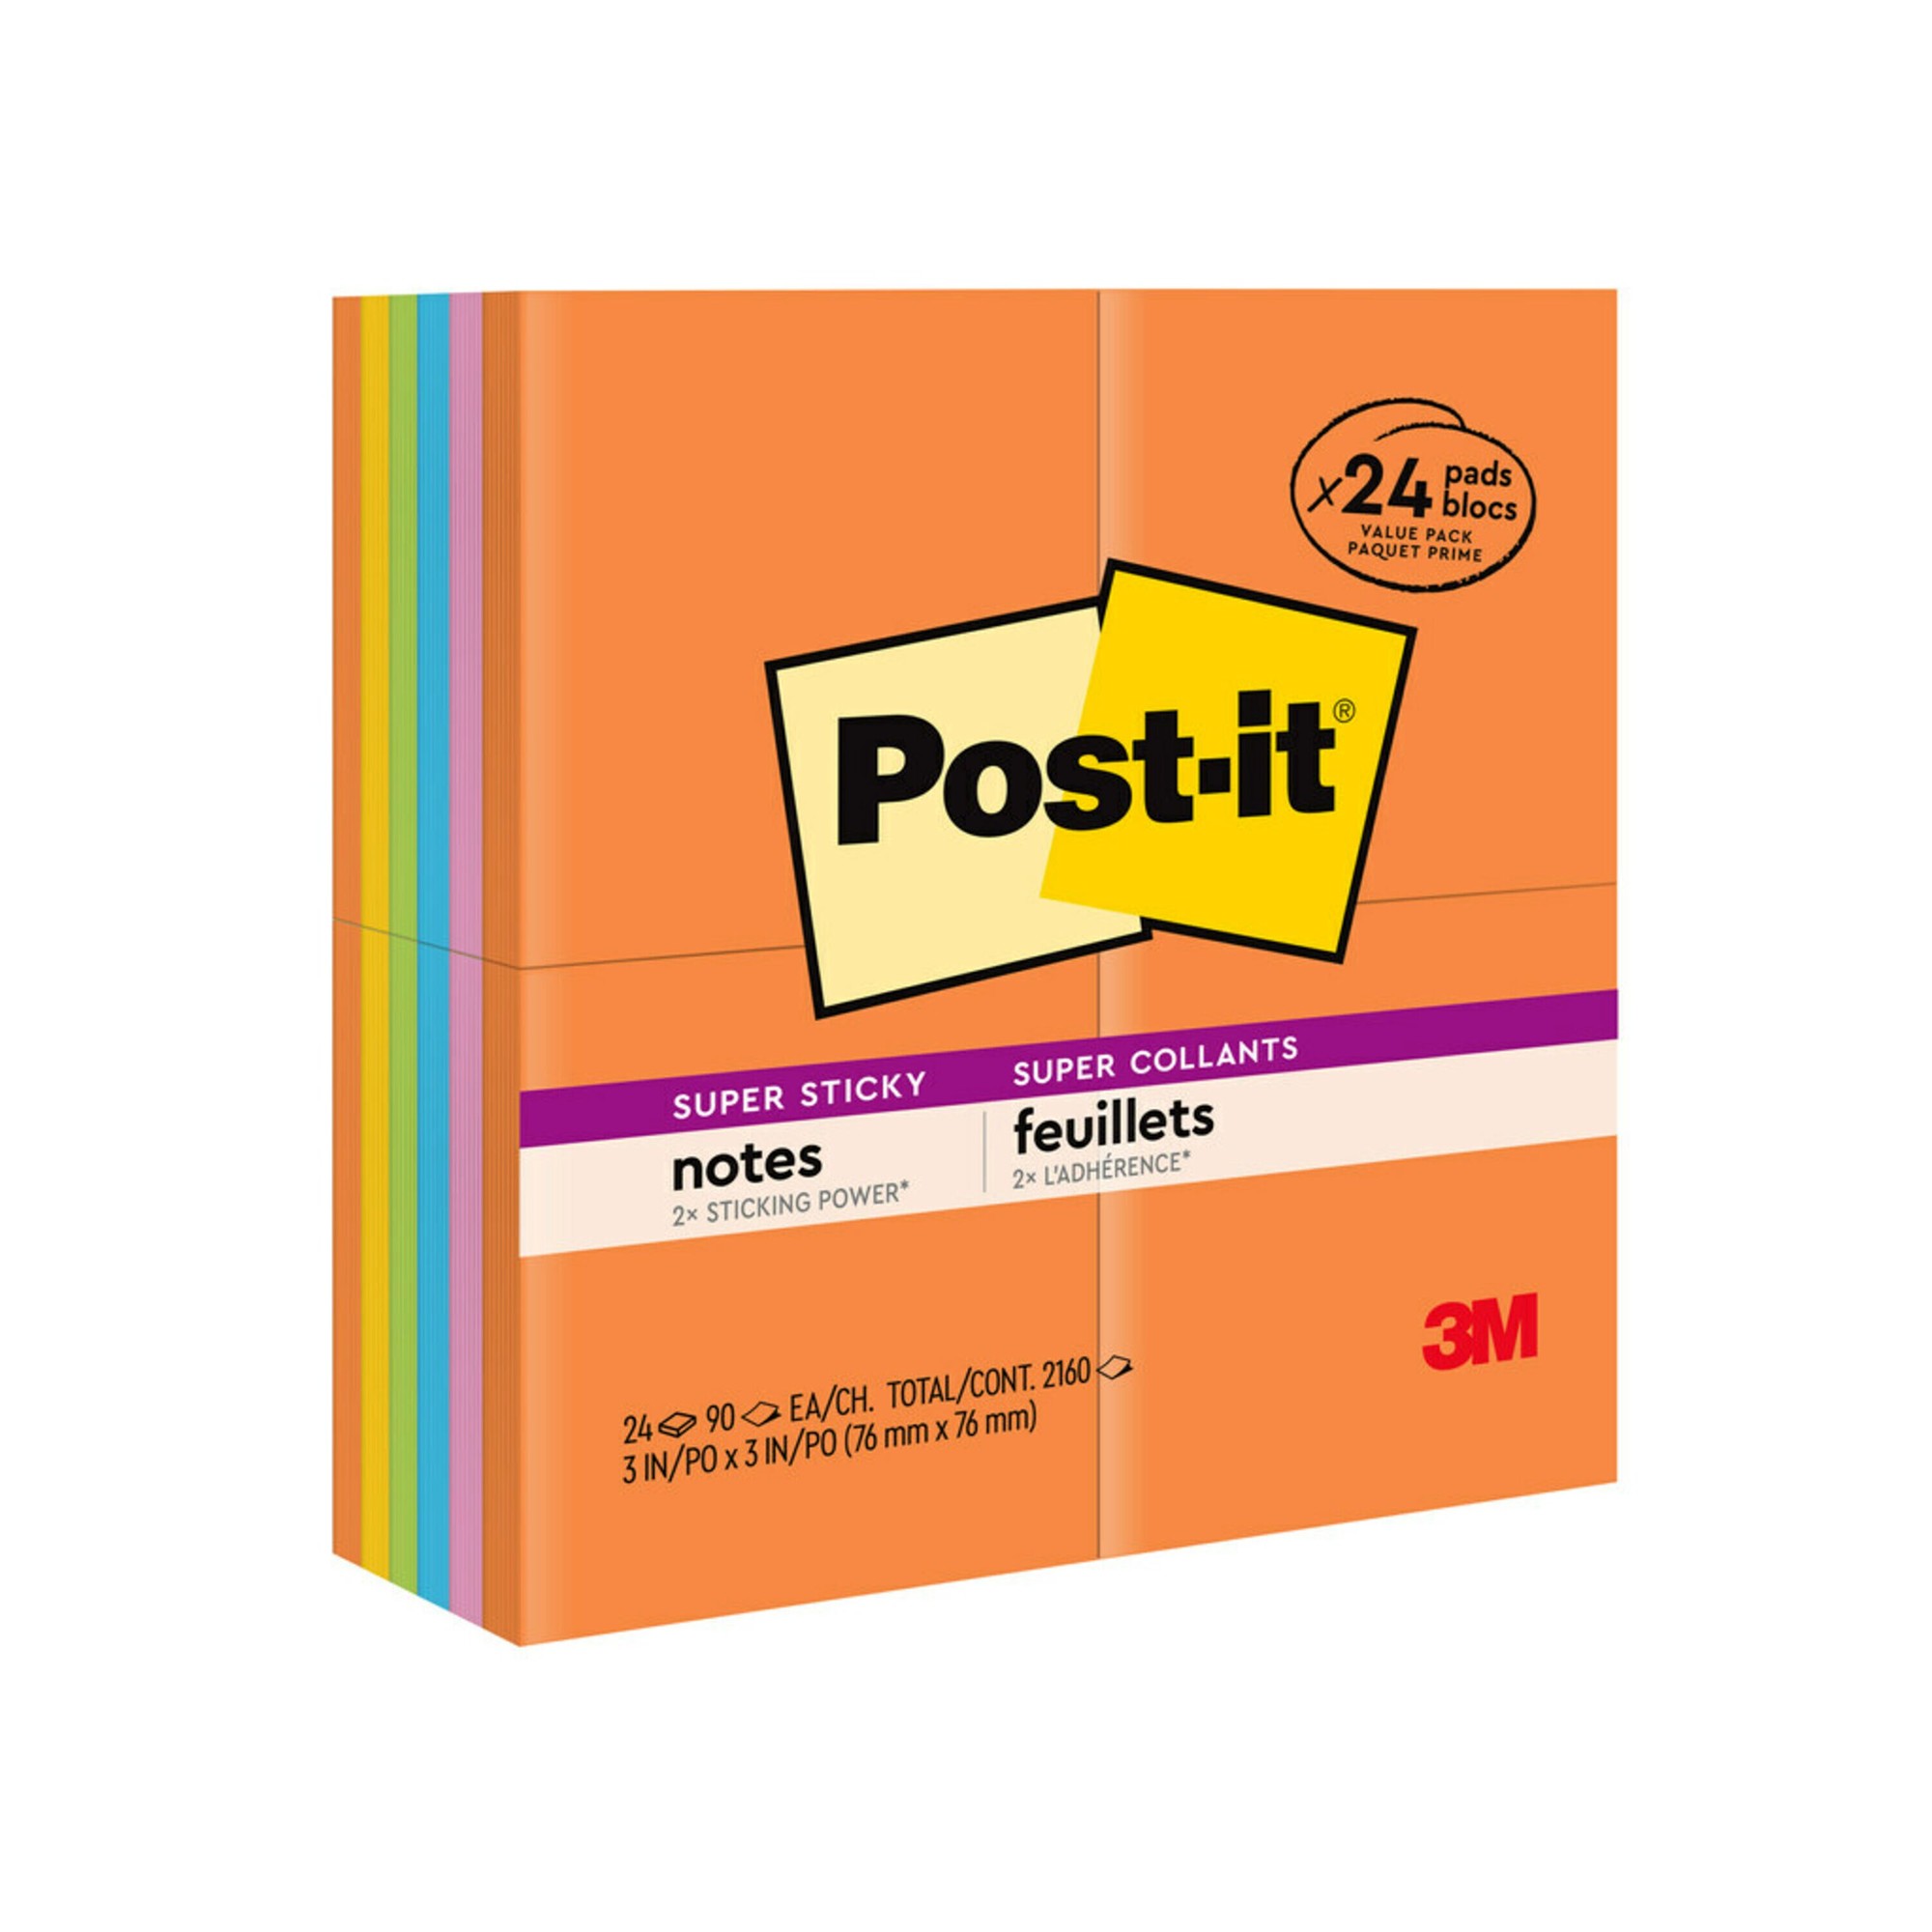 Post-it Super Sticky Notes - Energy Boost Color Collection - 1680 x Multicolor - 3" x 3" - Square - 70 Sheets per Pad - Vit